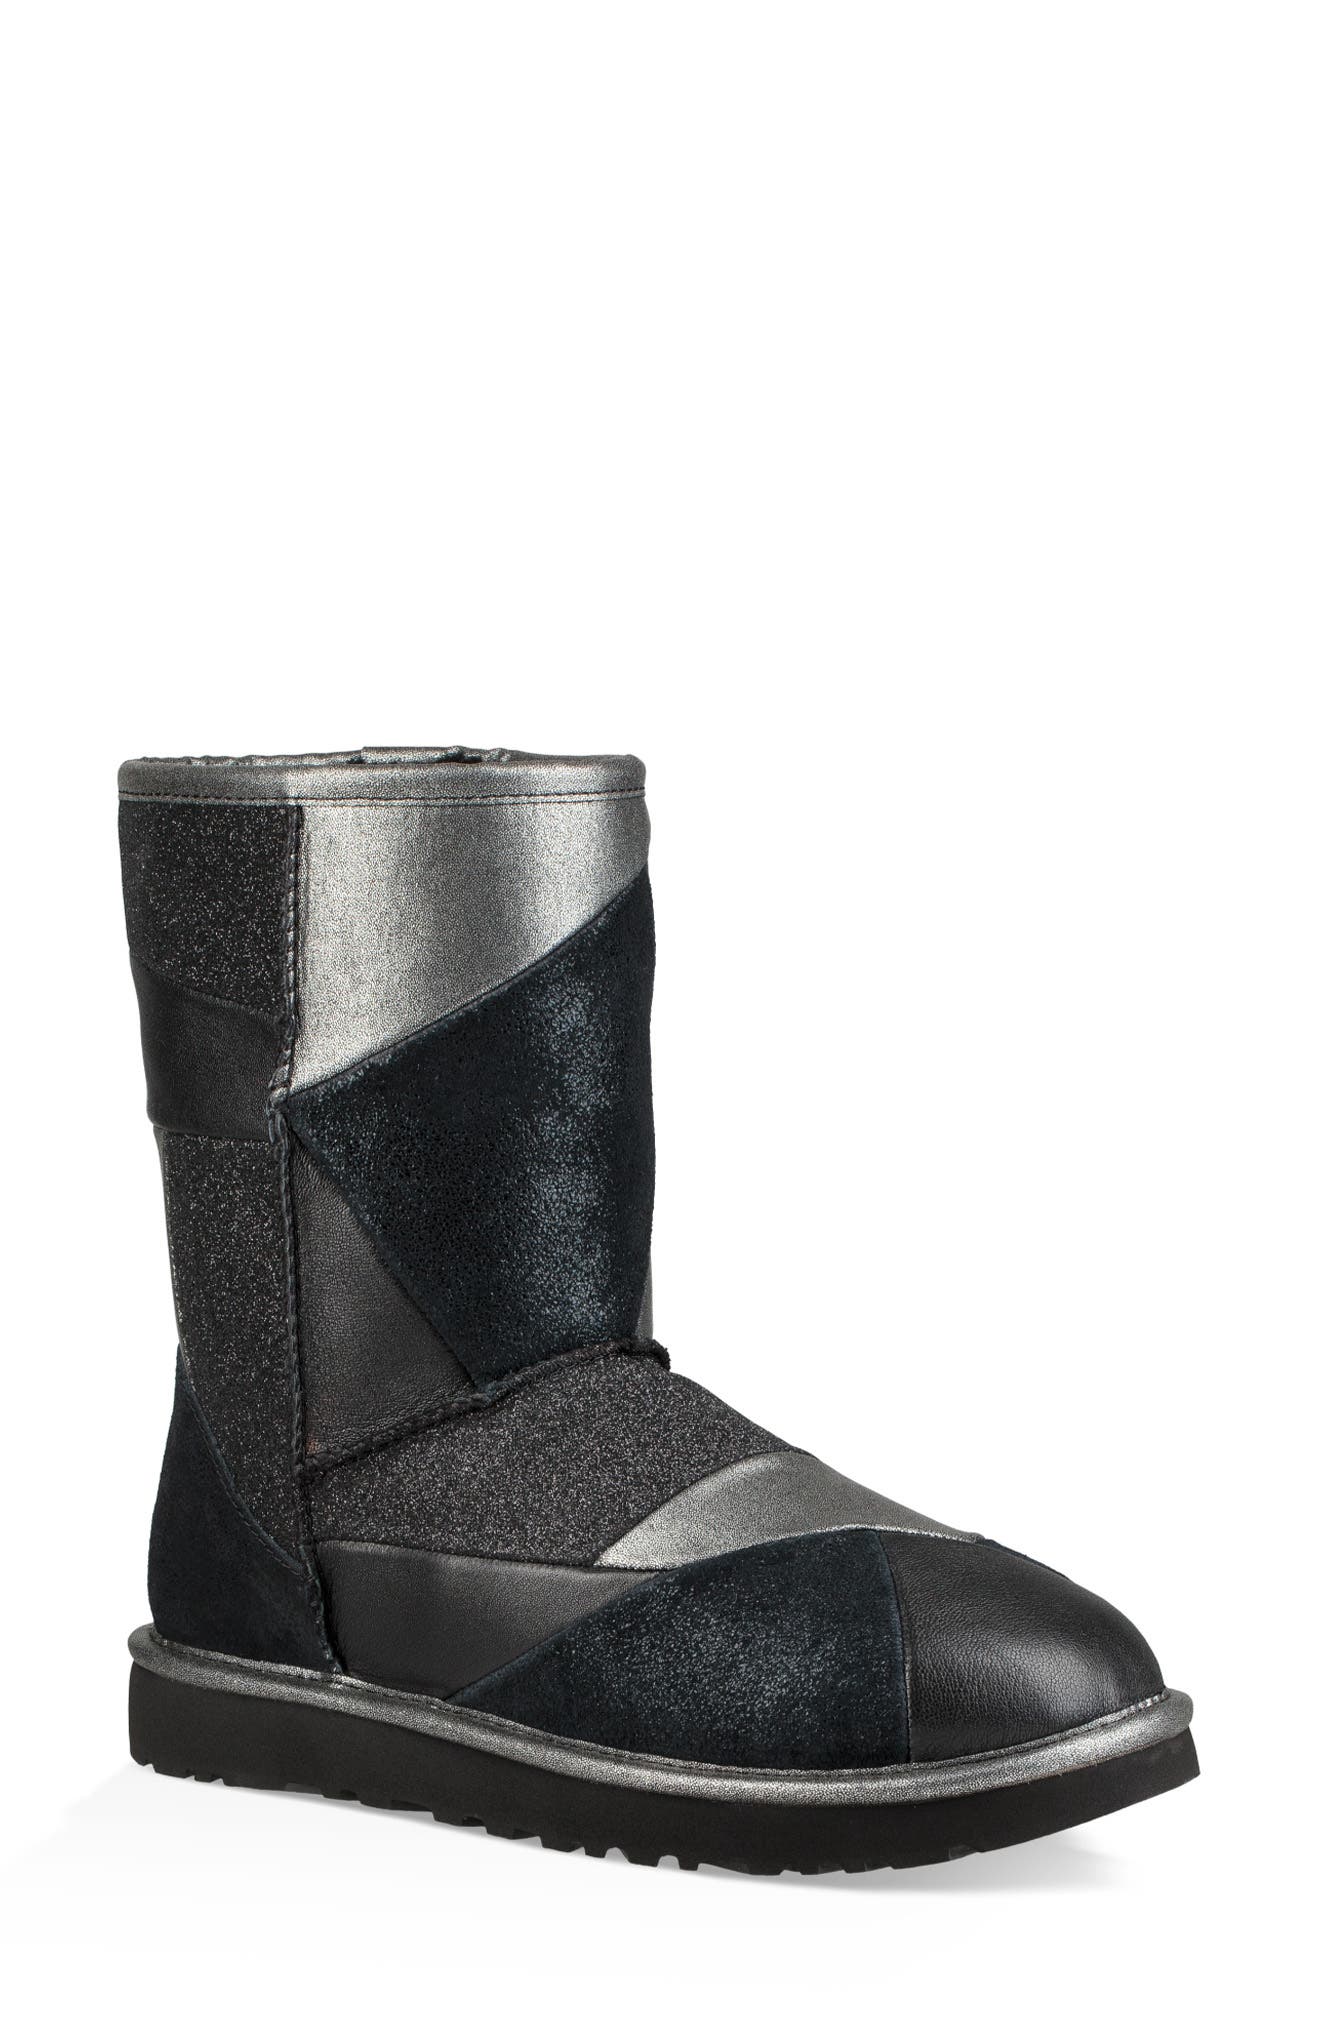 silver patchwork uggs